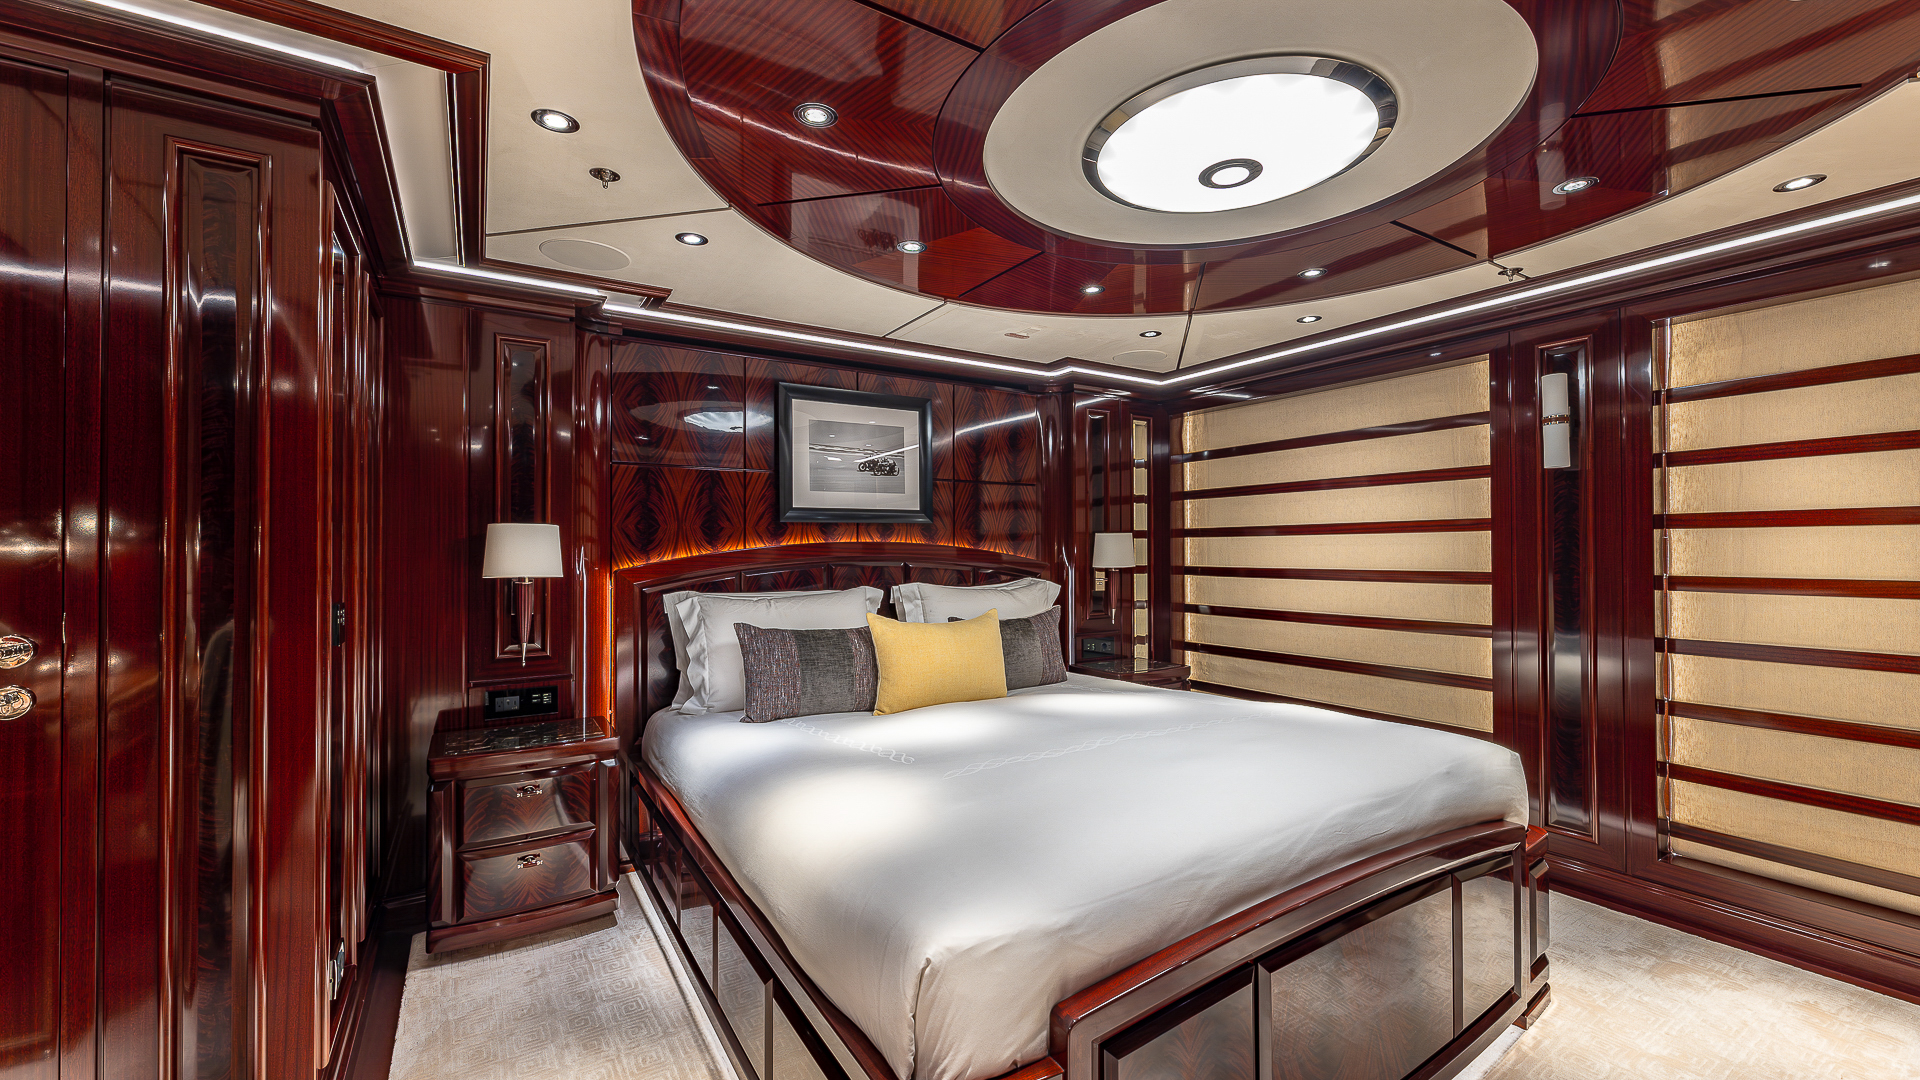 Rock It King VIP Guest Suite Starboard Aft - Bed With Blinds Closed Credit Yachting Image